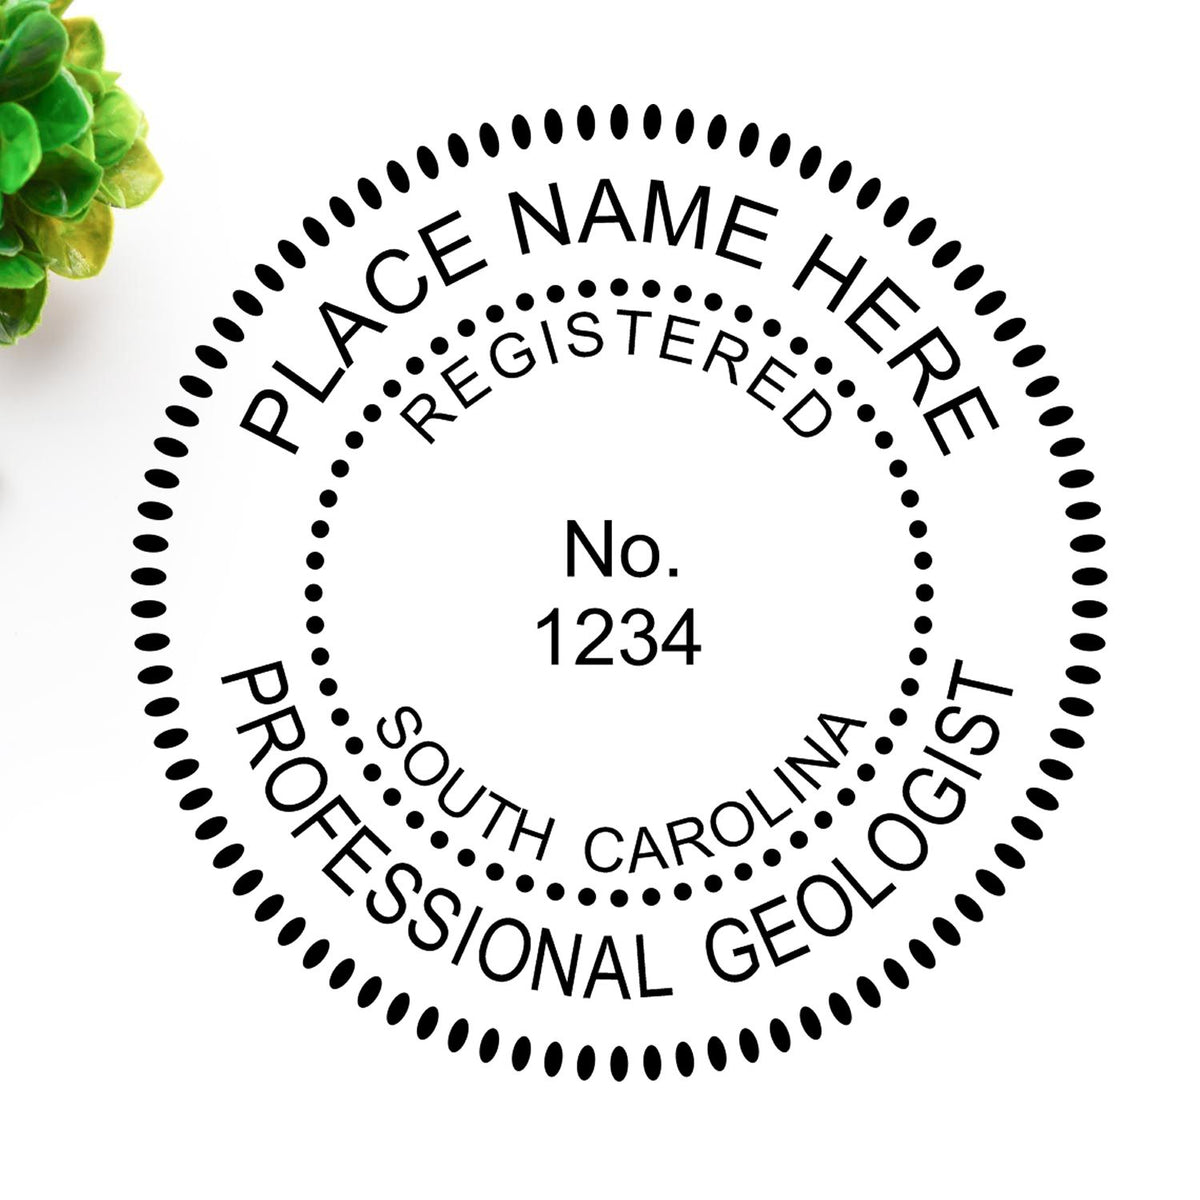 A lifestyle photo showing a stamped image of the Self-Inking South Carolina Geologist Stamp on a piece of paper